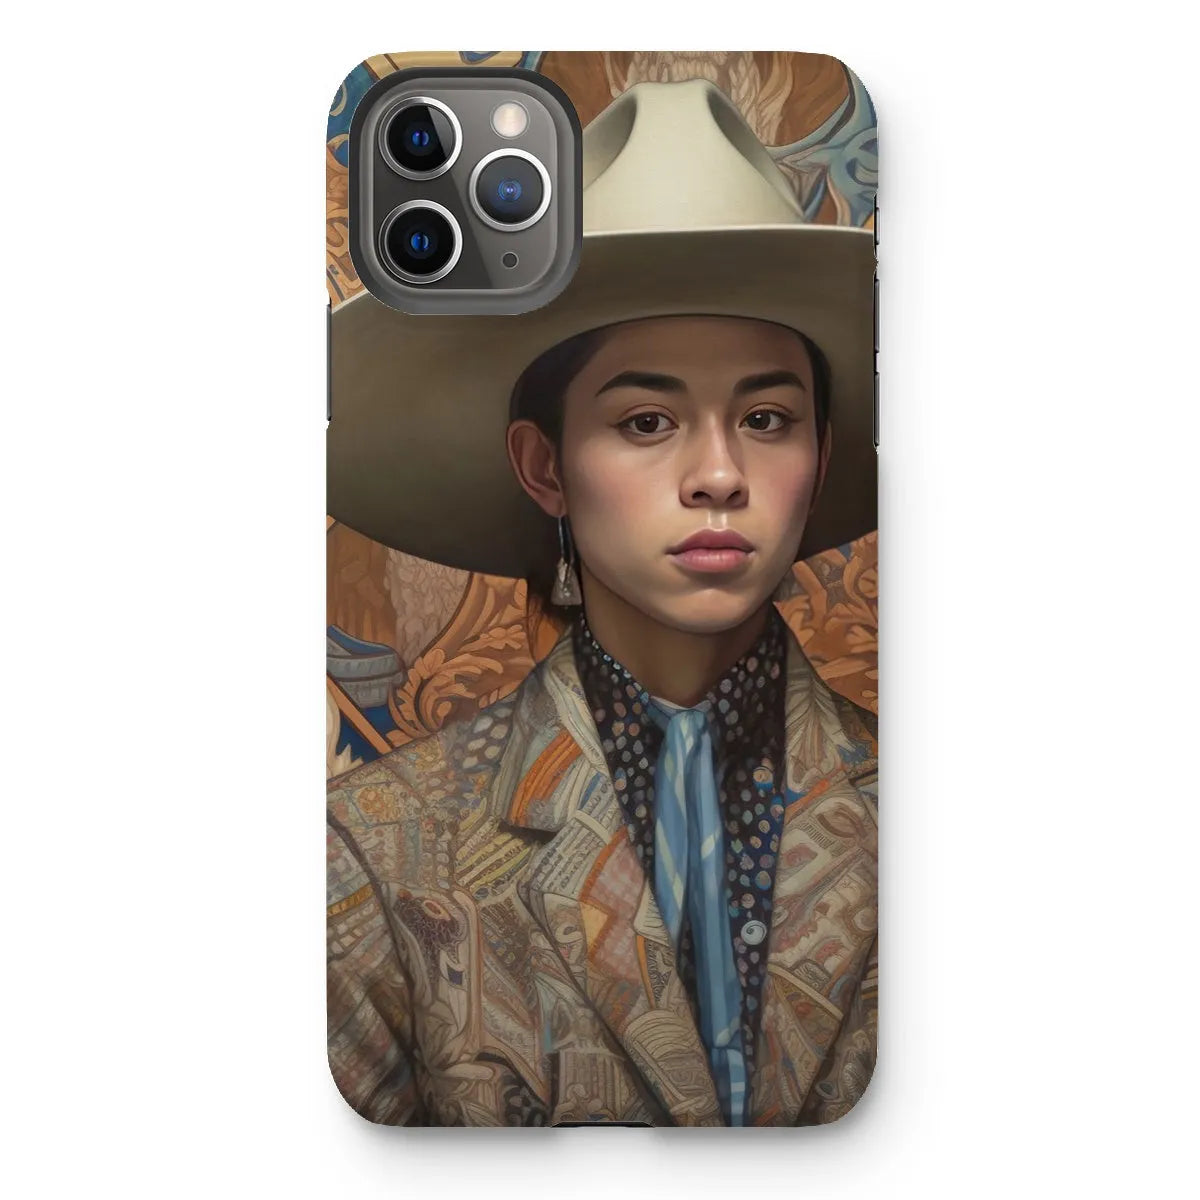 Angel The Transgender Cowboy - F2m Outlaw Art Phone Case - Iphone 11 Pro Max / Matte - Mobile Phone Cases - Aesthetic